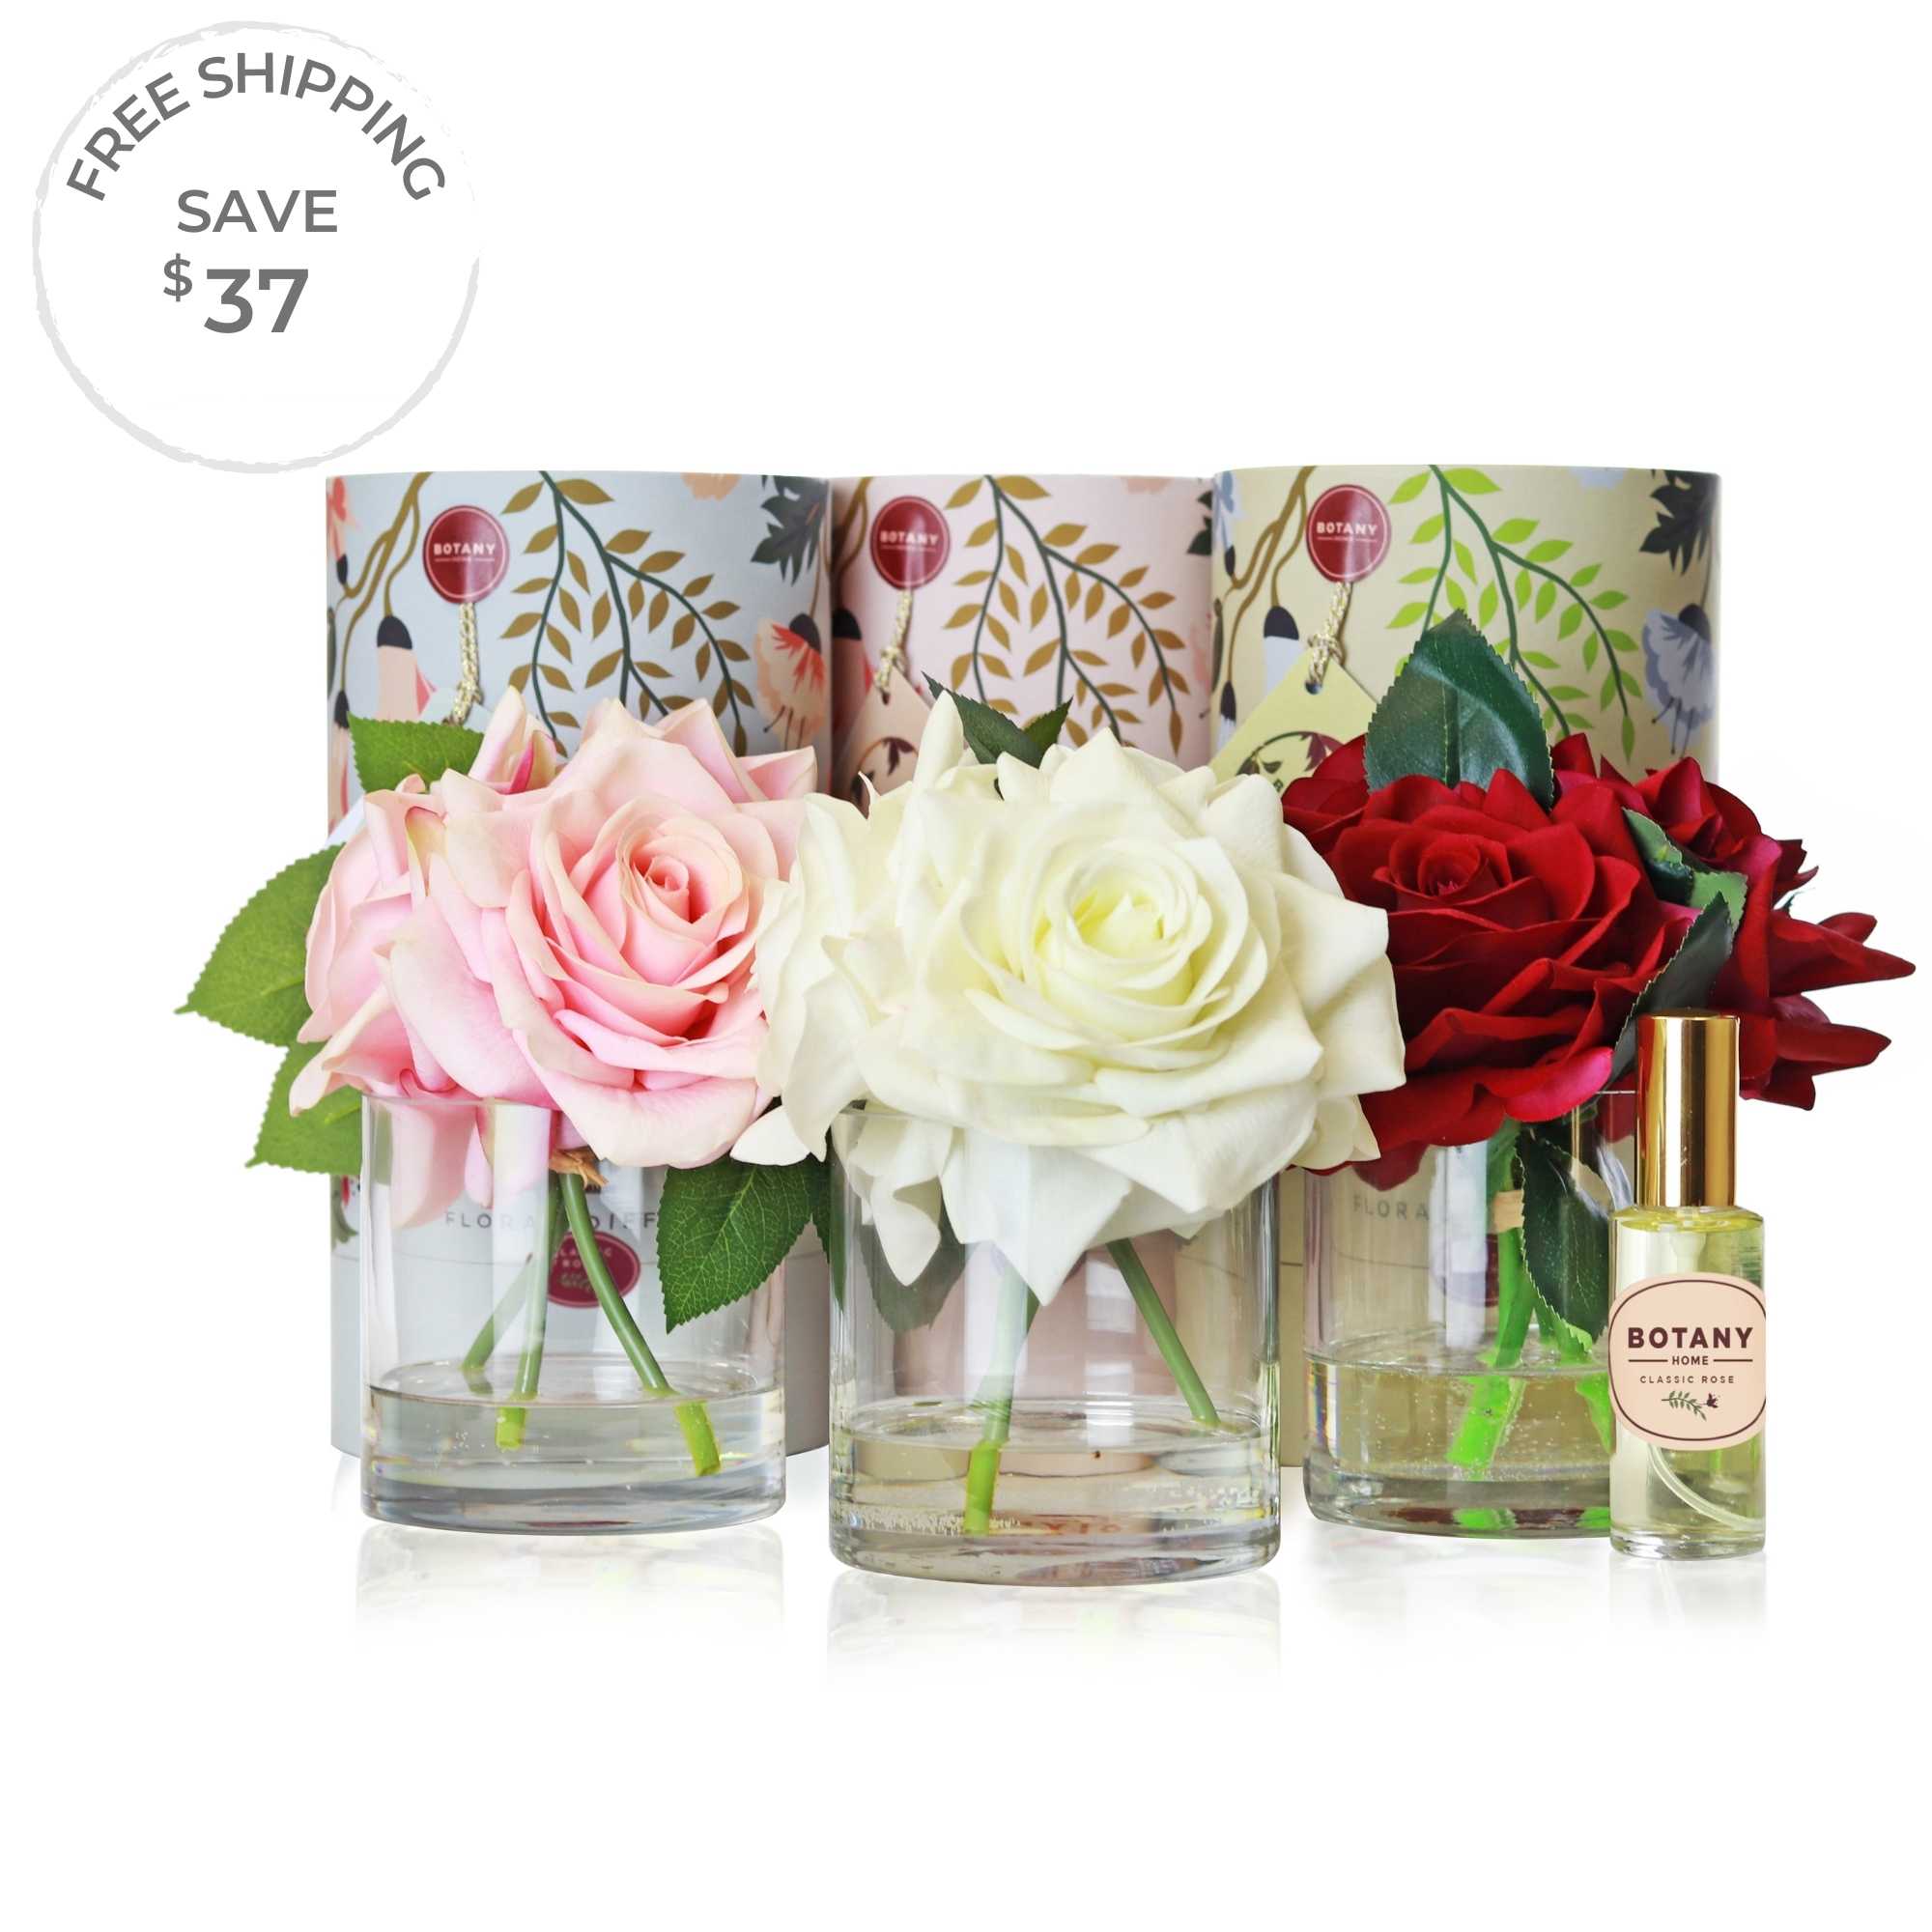 A set of 3 artificial triple rose arrangements with accompanying floral scent sprays sold as a set of 3